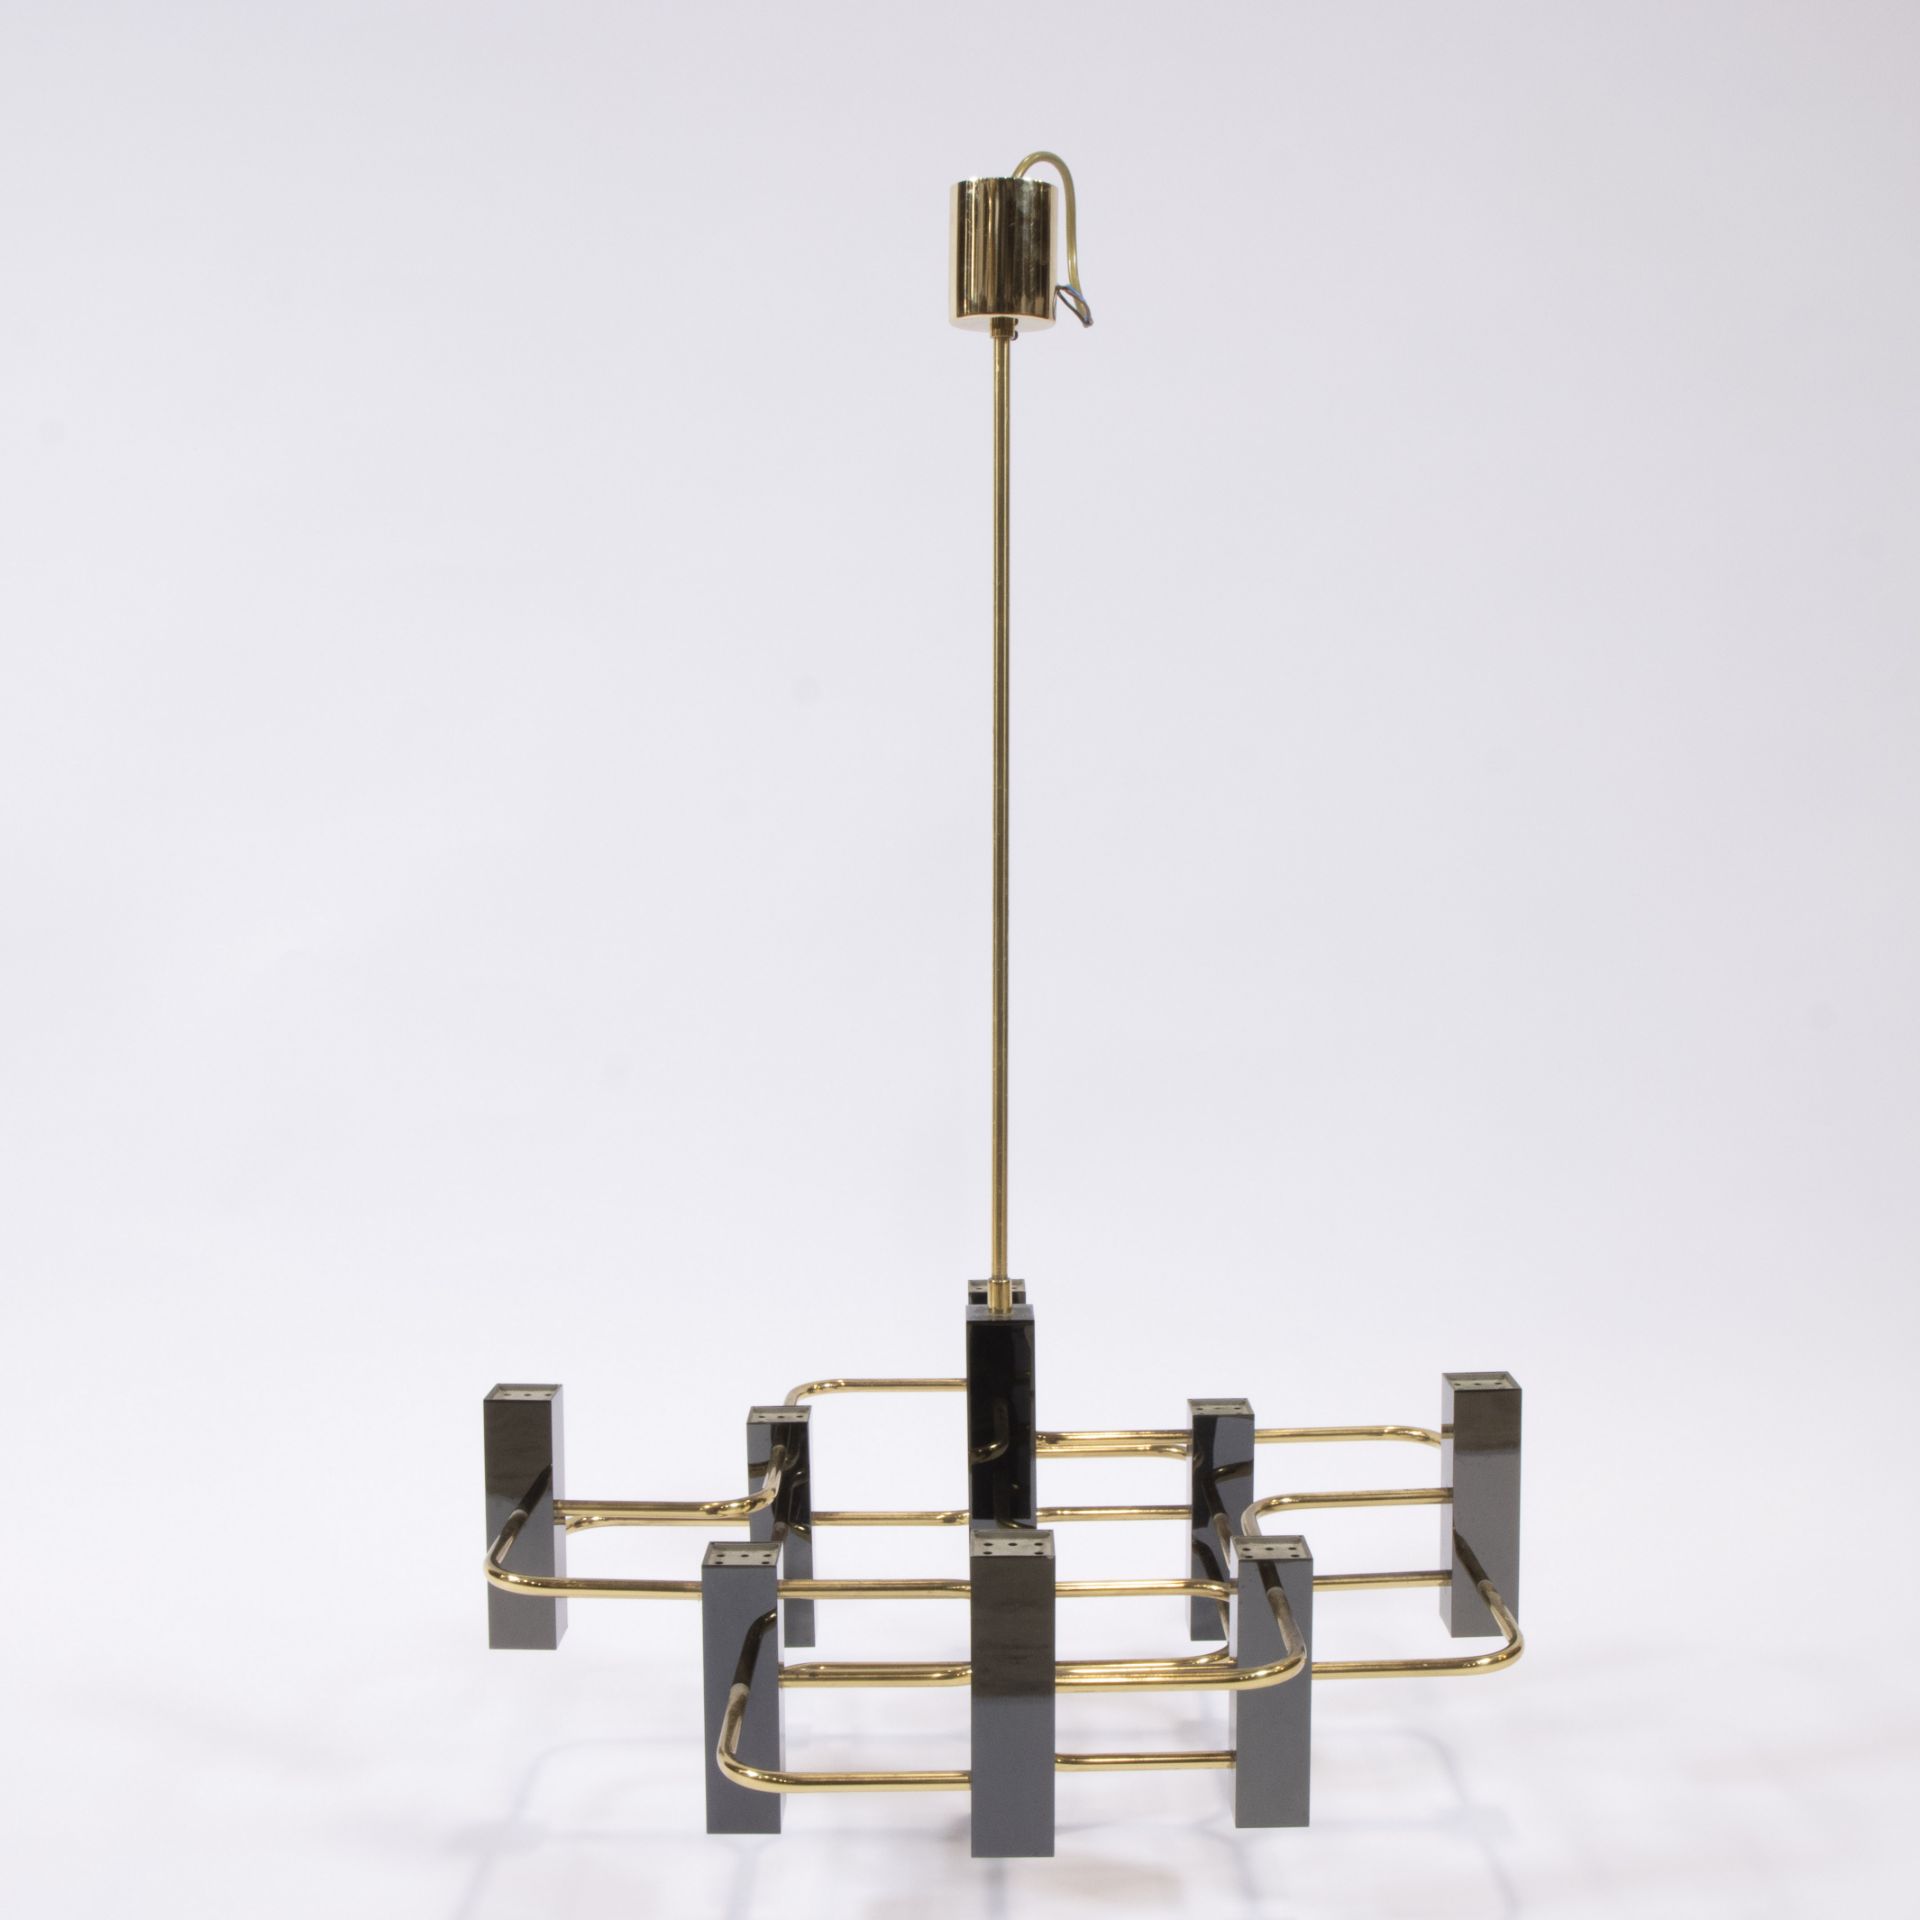 Mid-century modernist chandelier by Gaetano Sciolari for Boulanger, gunmetal and brass, 1970s, with - Image 6 of 6